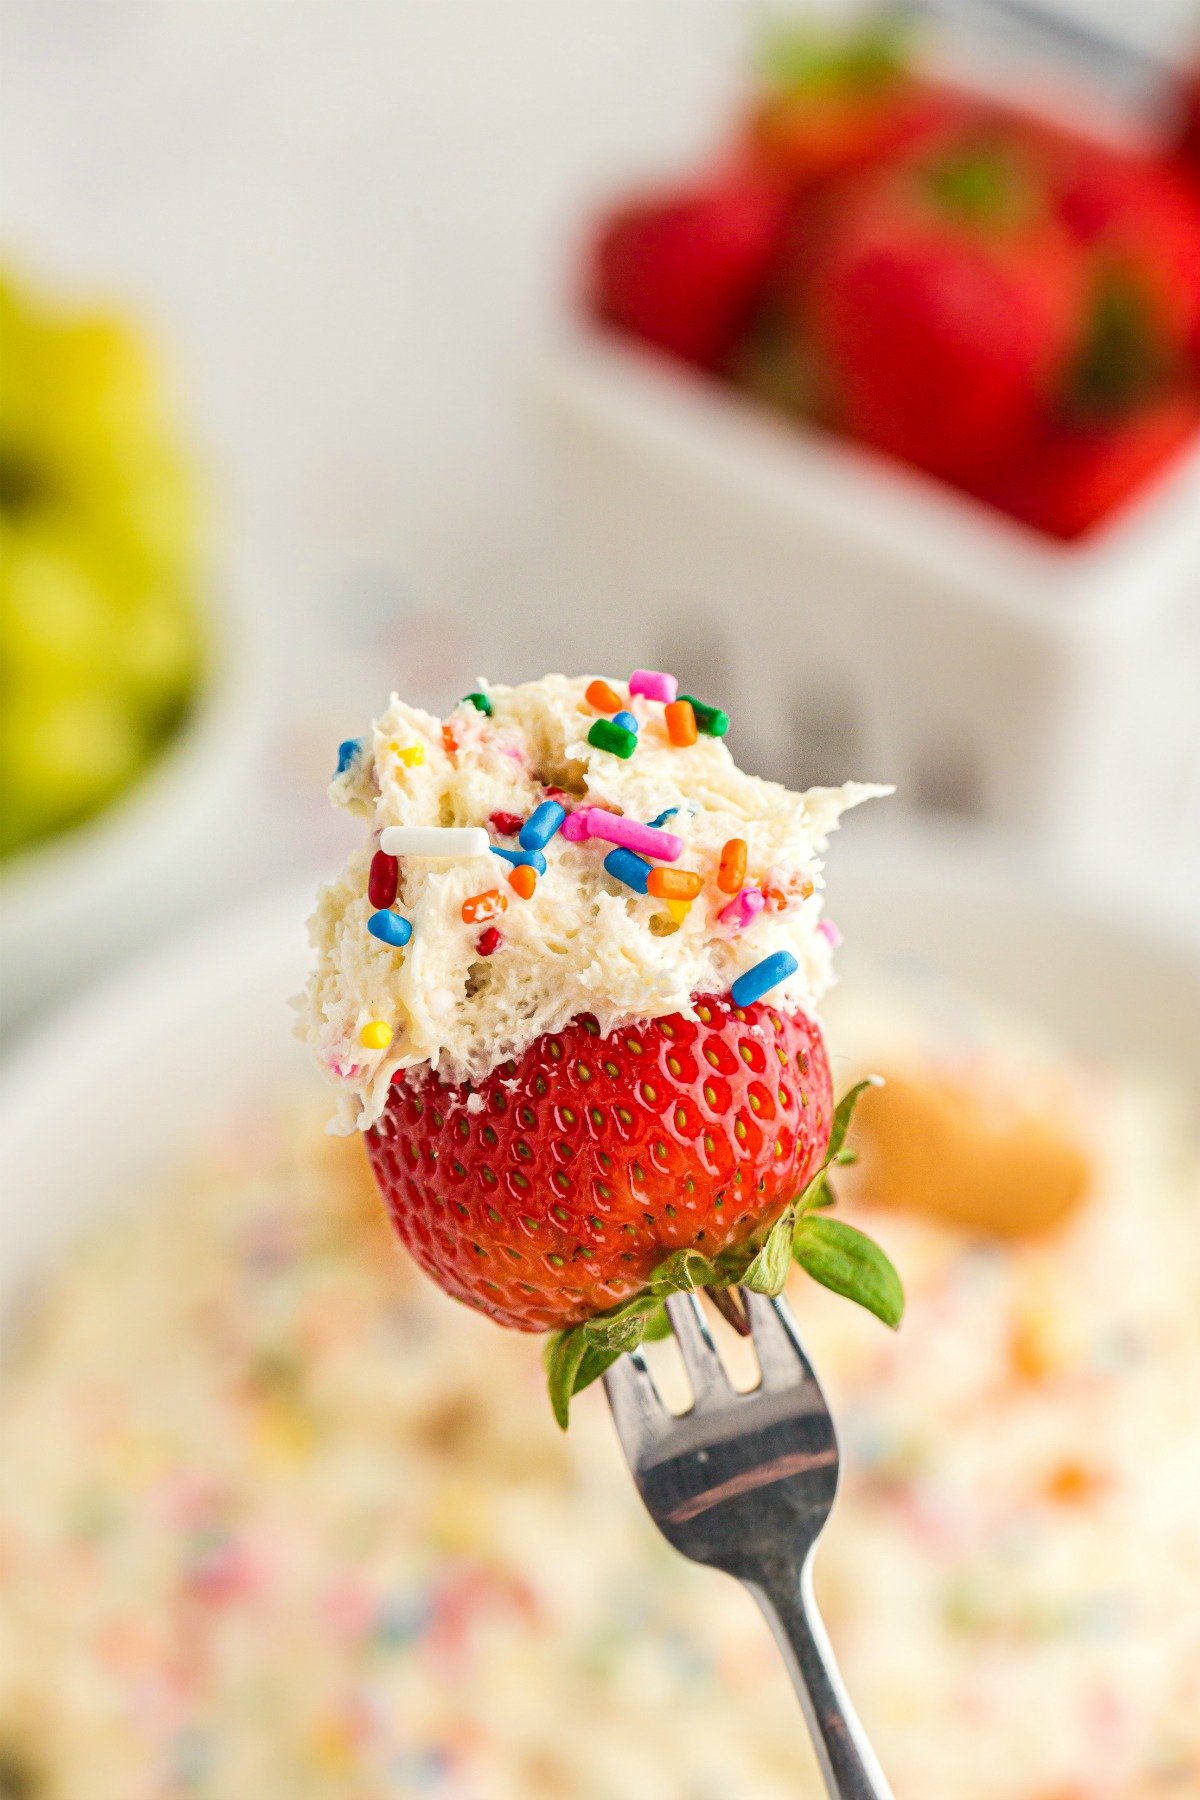 Strawberry dipped in funfetti dip with sprinkles.